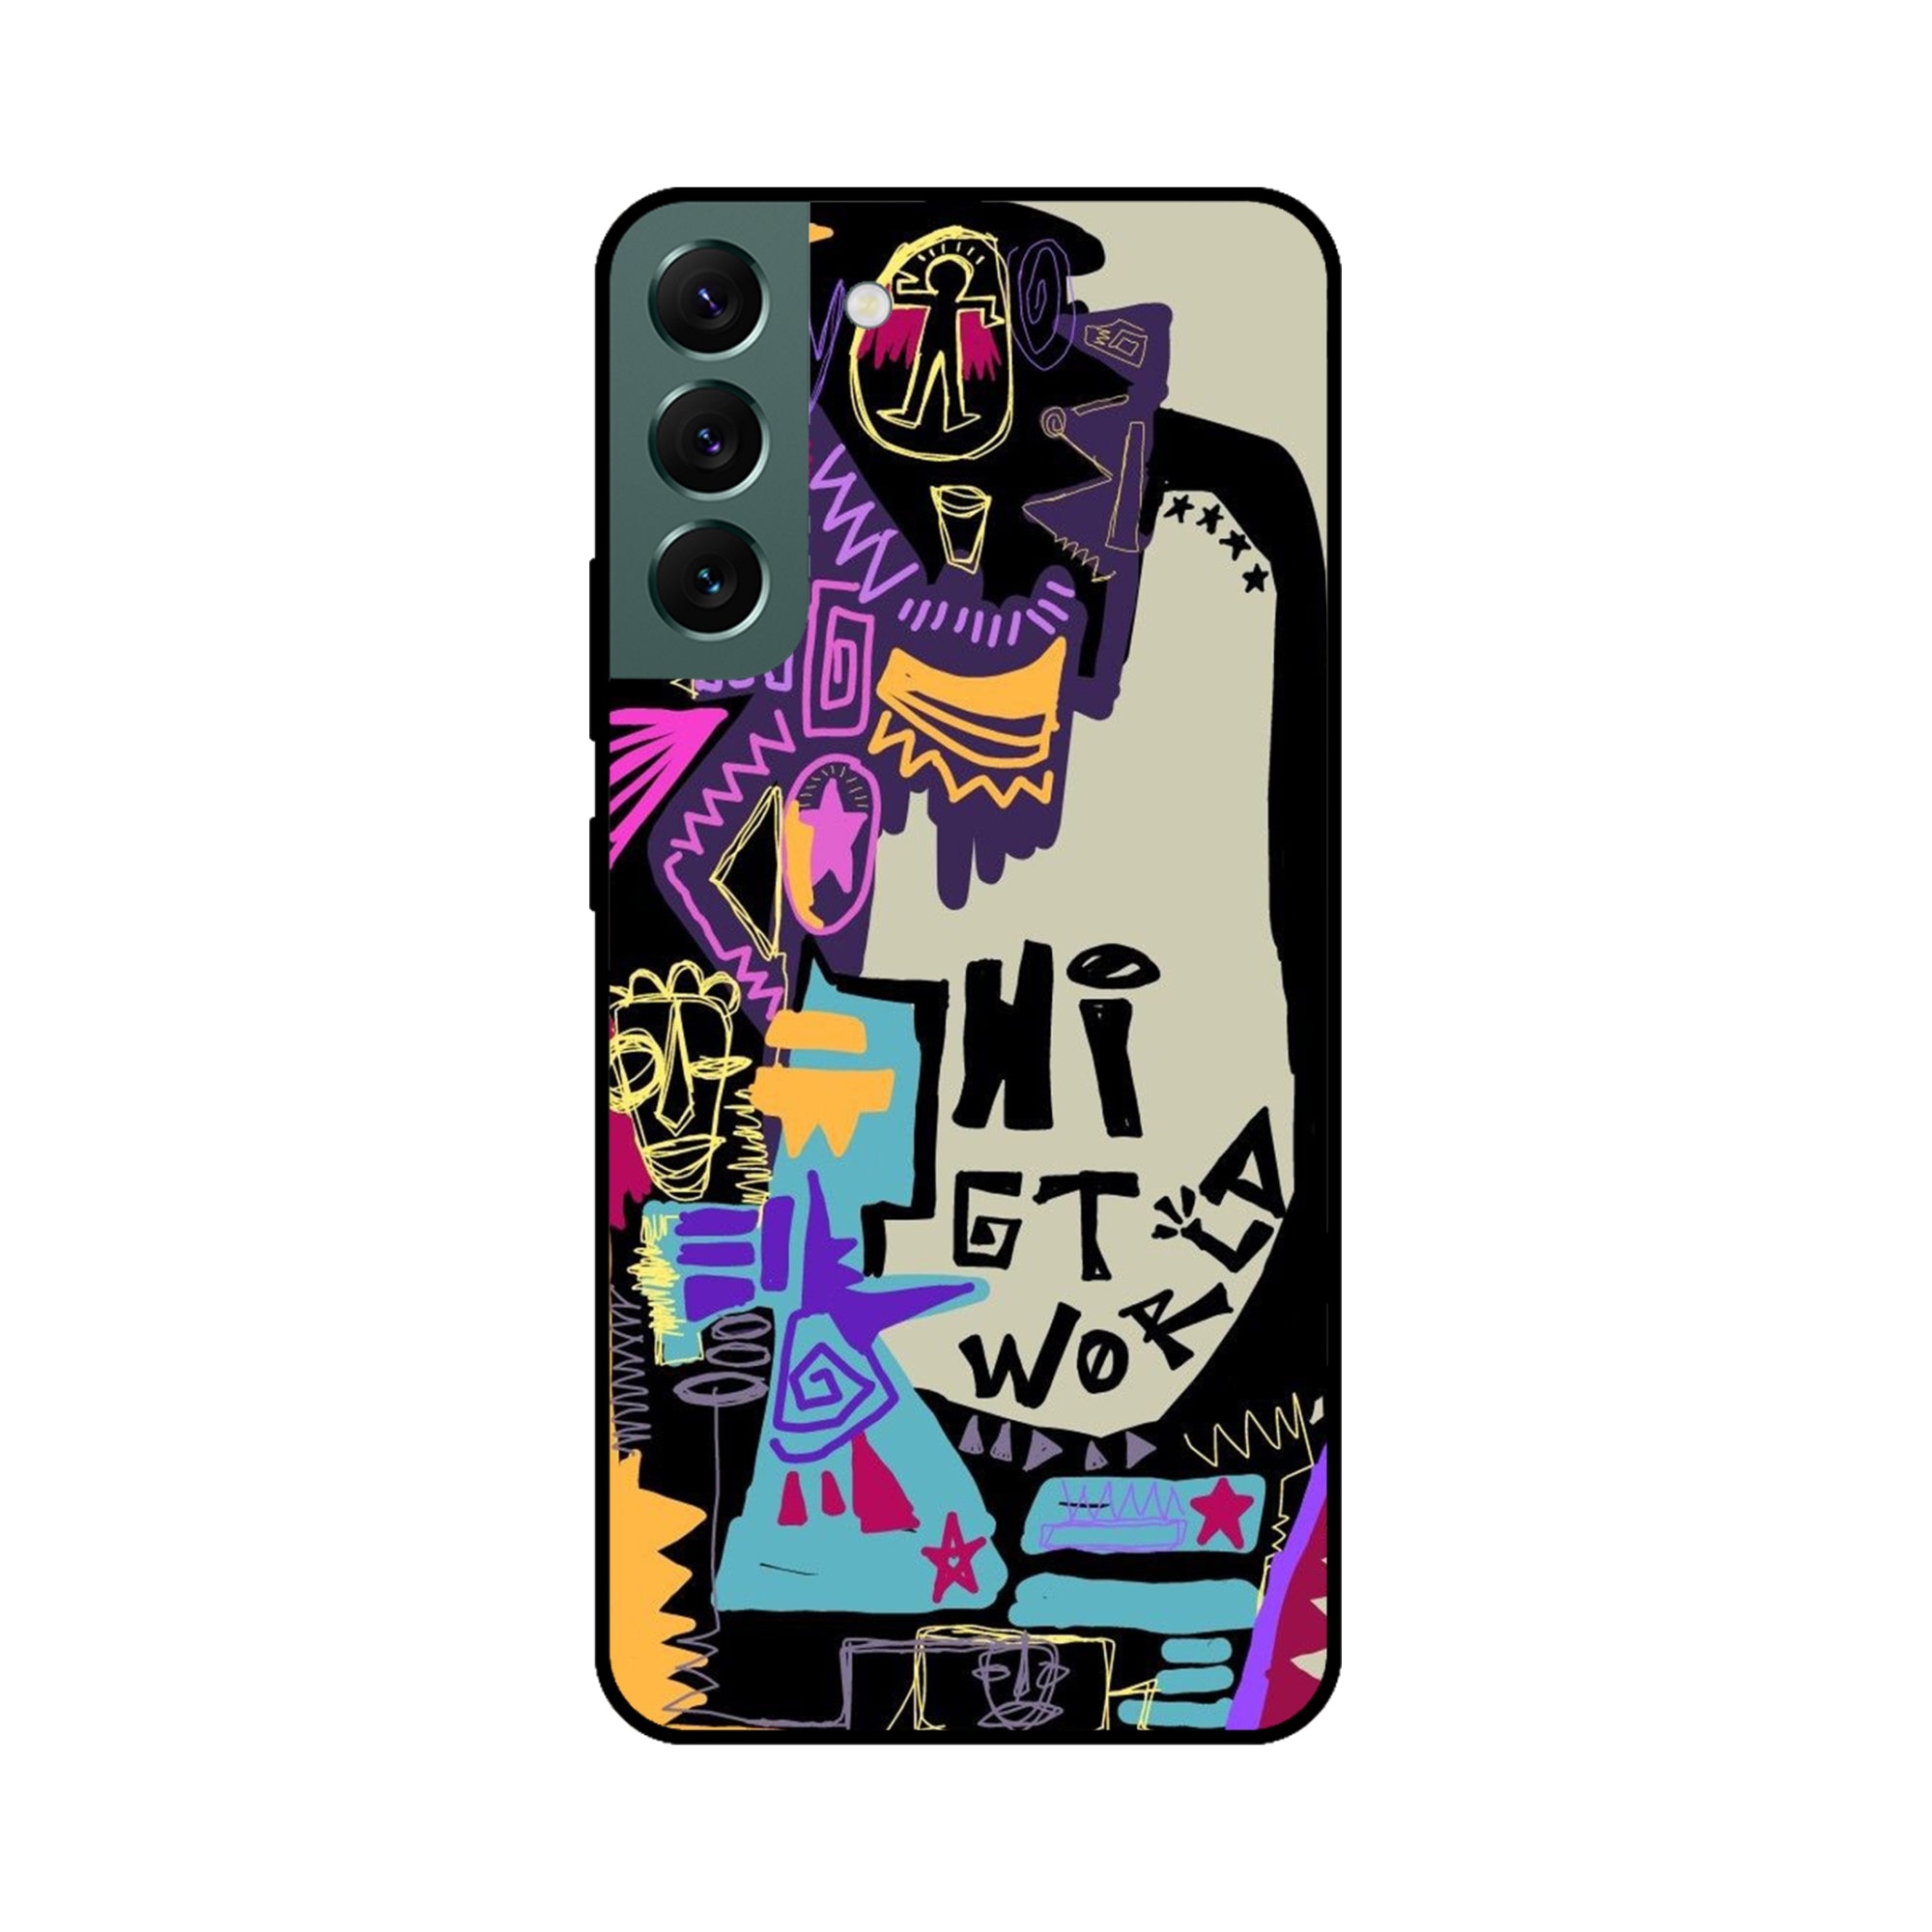 Buy Hi Gt World Metal-Silicon Back Mobile Phone Case/Cover For Samsung S22 Online